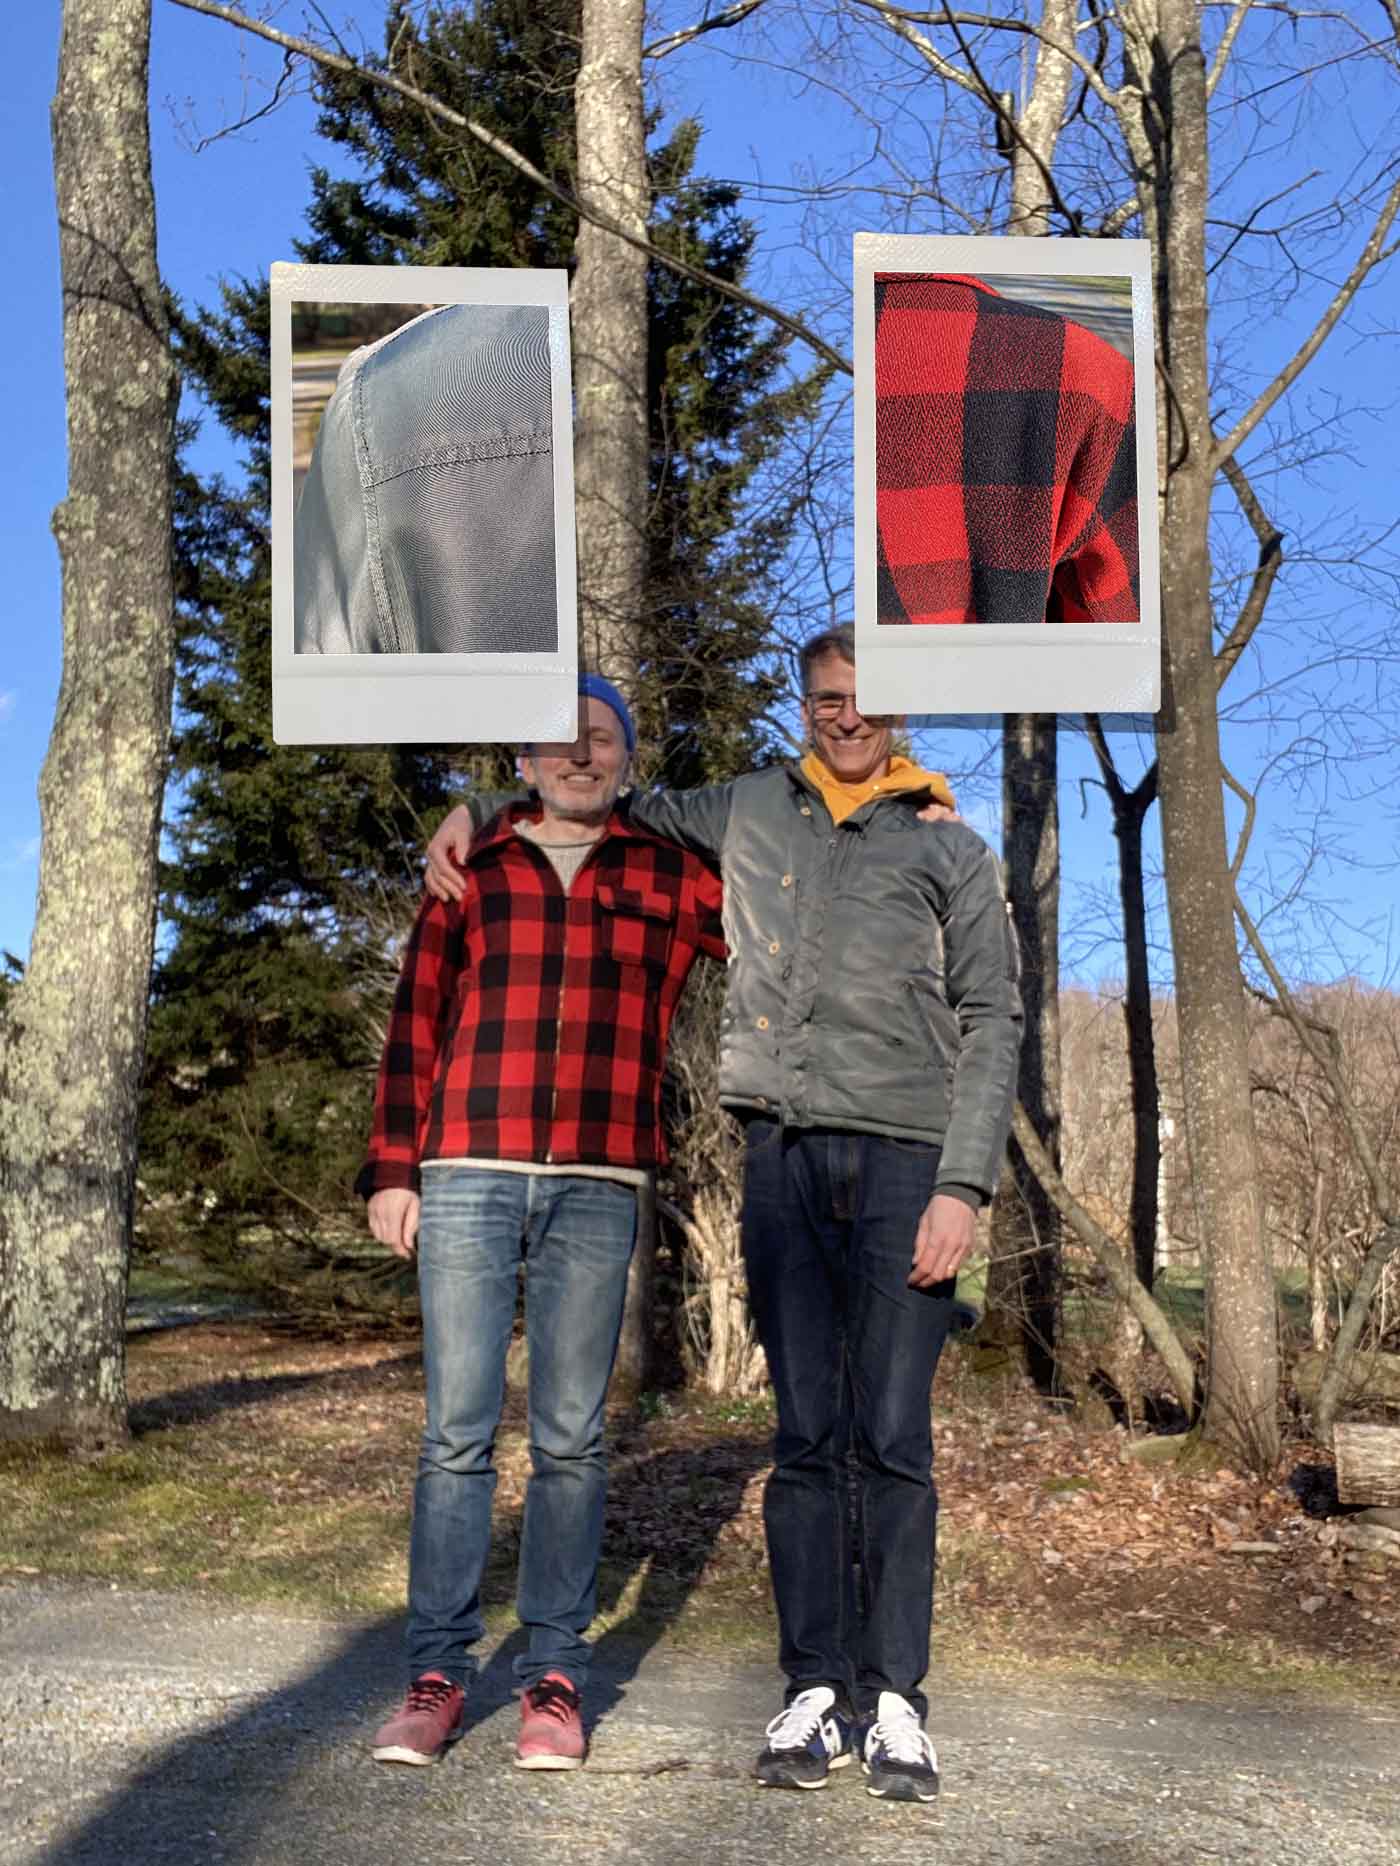 Photo-based textile art piece exploring synesthesia. Two men are smiling and standing with a arm around each others' shoulders. They are outside, and it is winter. Behind them are some bare trees and an evergreen, with clear blue sky. One man wears a bright red flannel jacket. The other wears a shimmery gray jacket. Overlaid onto the photo are two polaroid close-ups of each jacket, placed directly above and slightly overlapping each body.